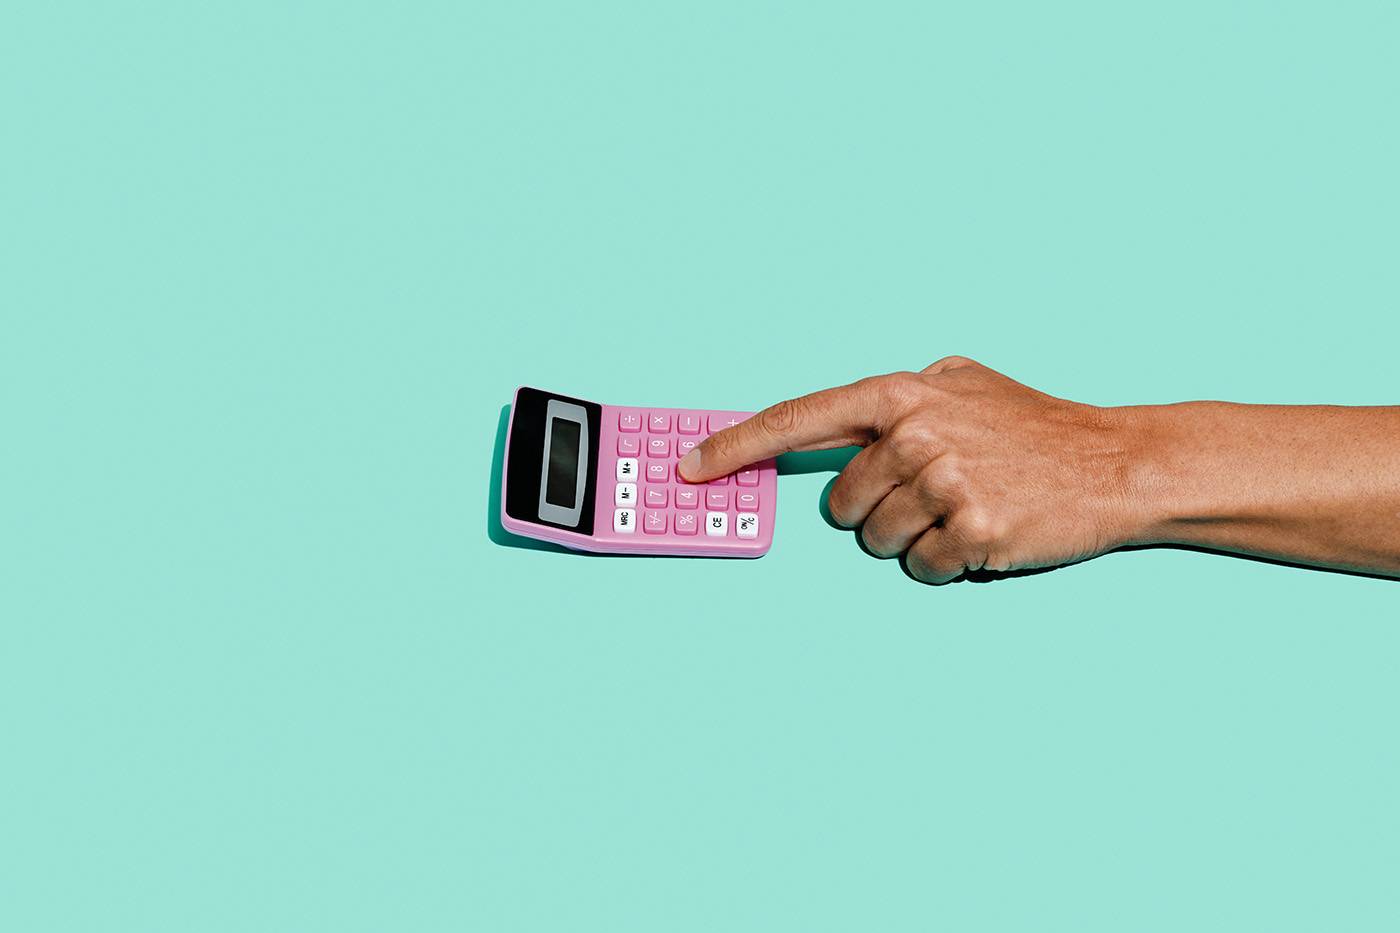 a young man uses a pink electronic calculator on a blue background